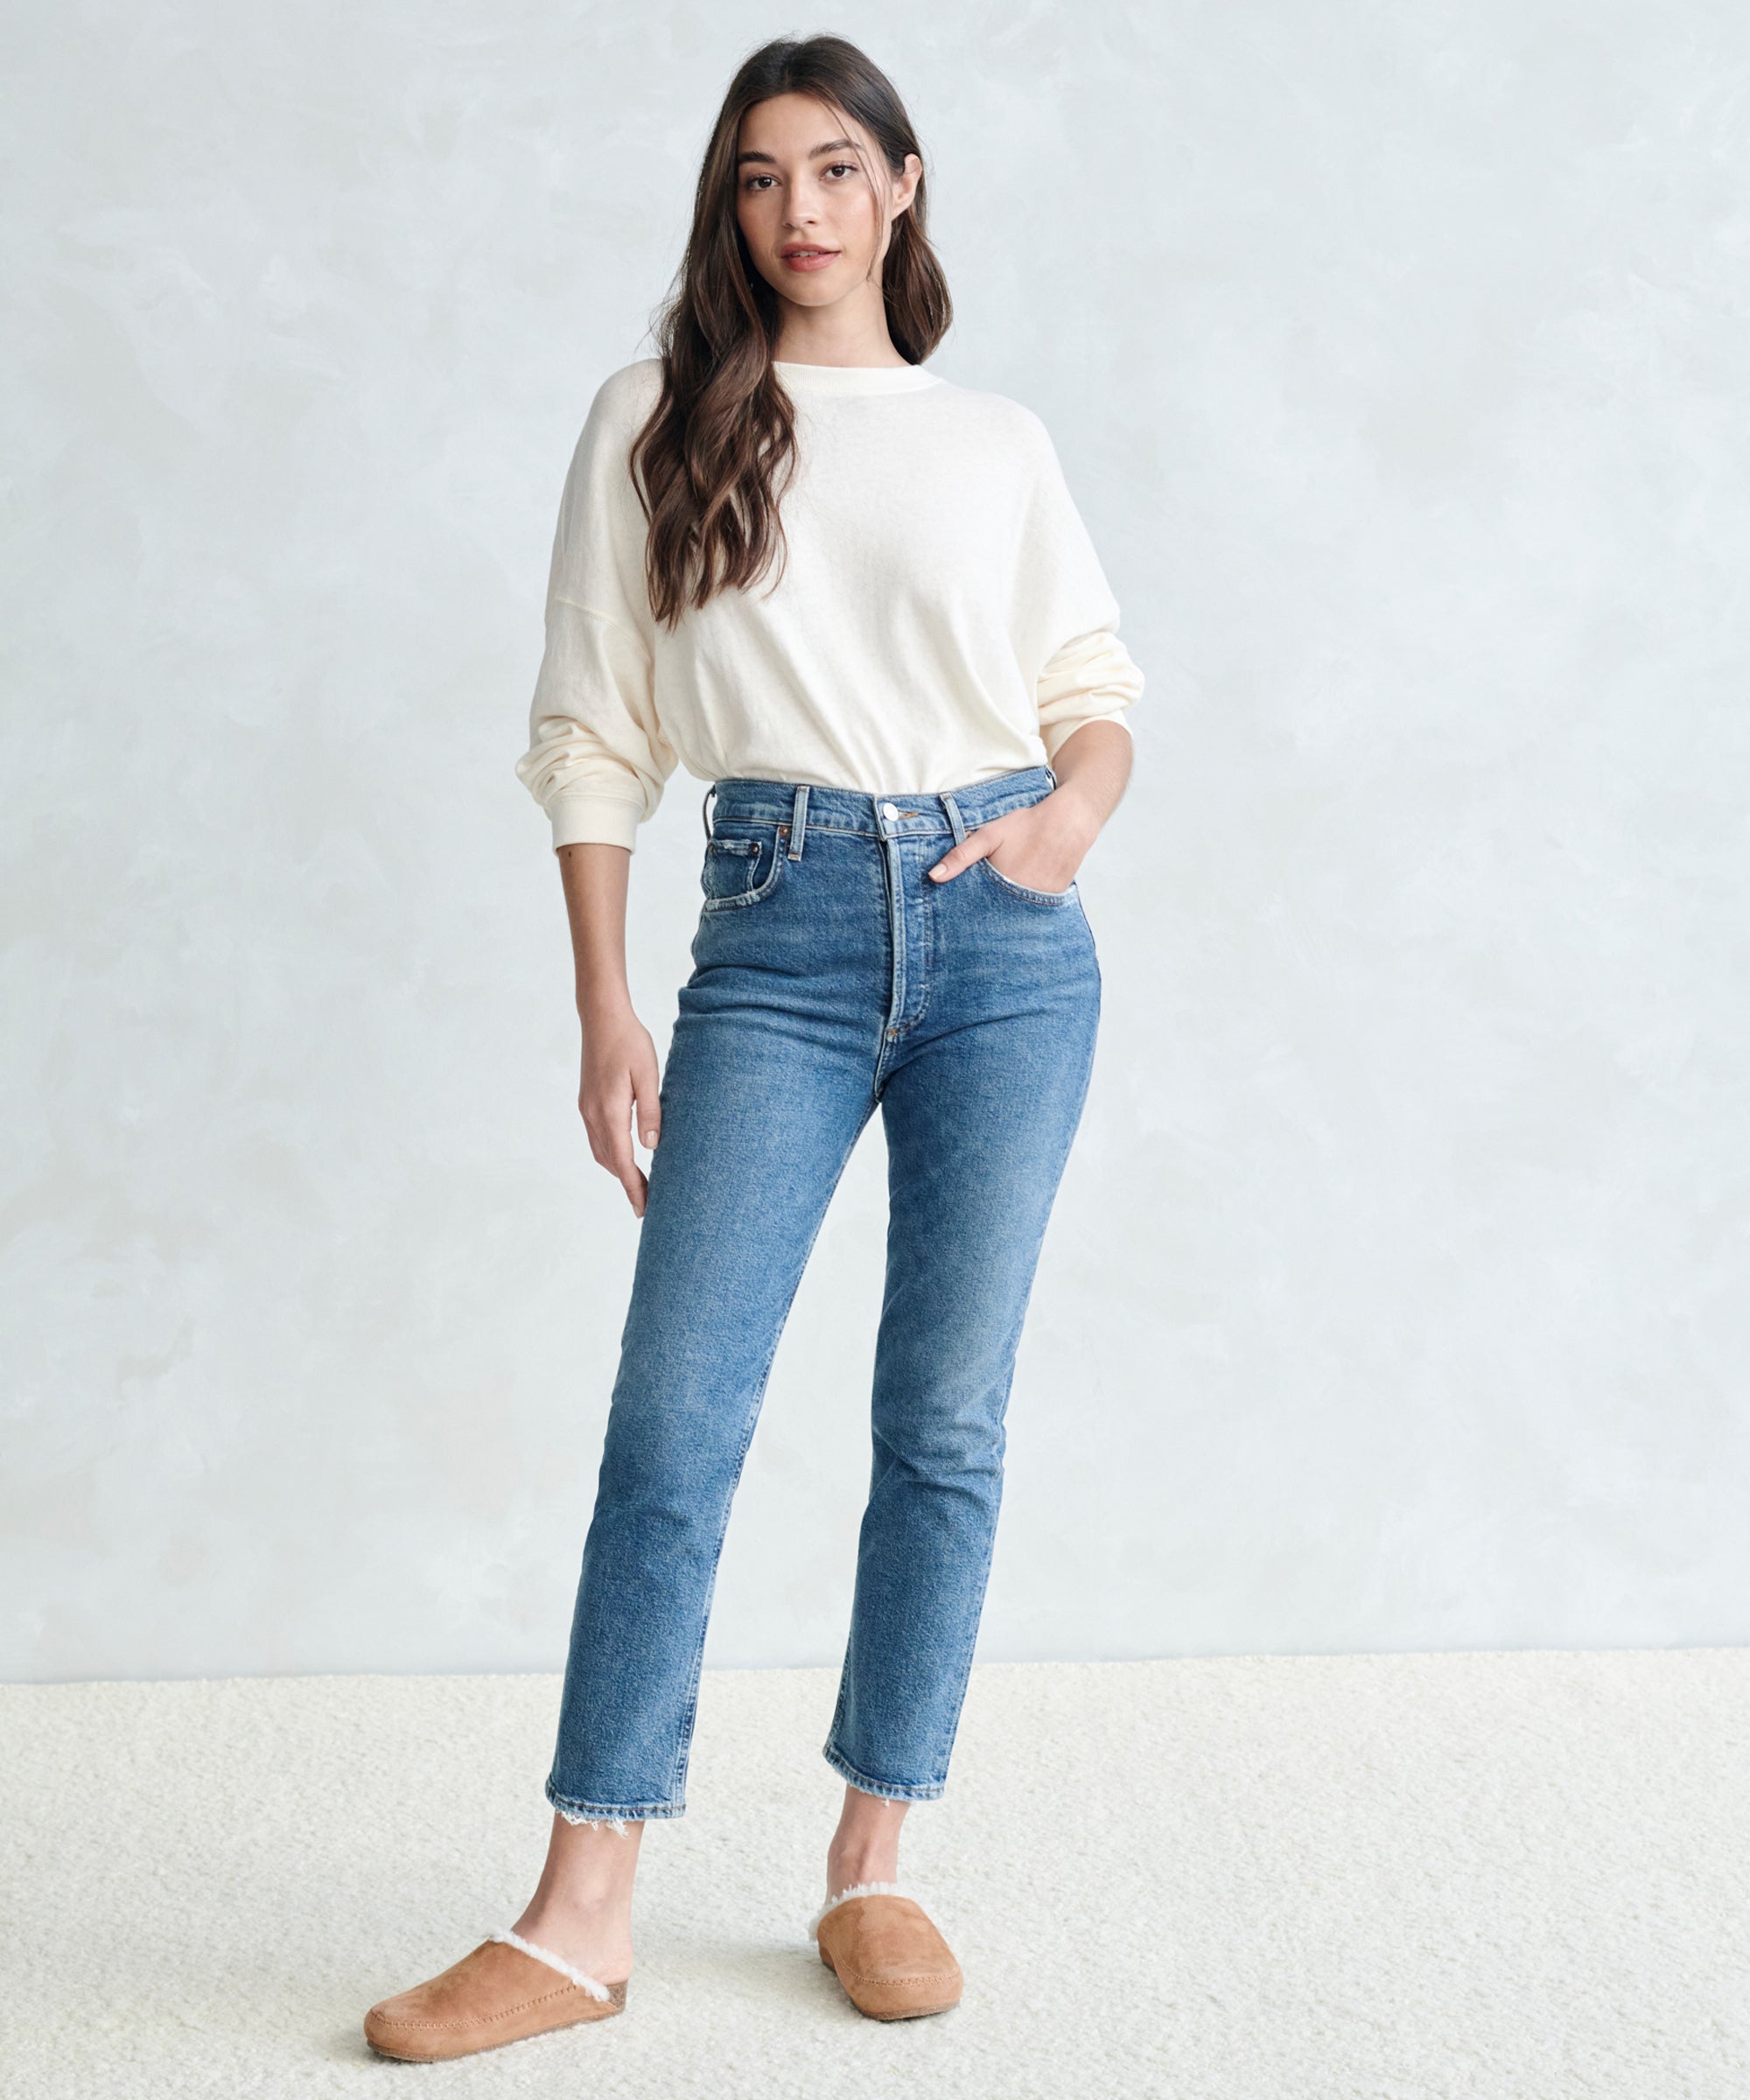 TRF STOVE PIPE JEANS WITH A HIGH WAIST  Moda fashion, Ankle length jeans,  Cute outfits